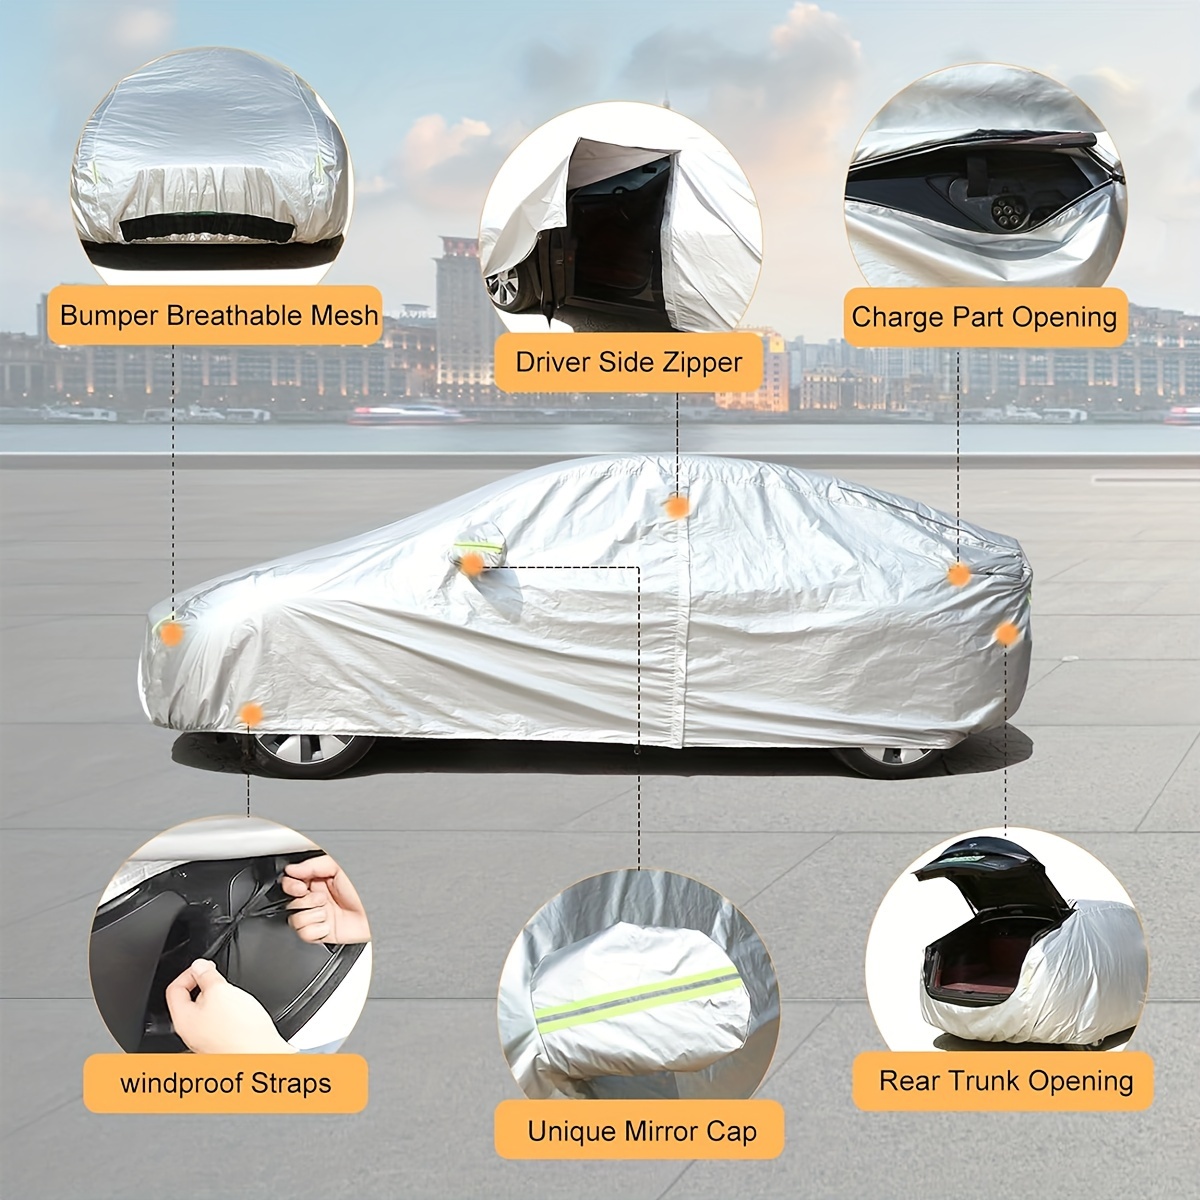 Full Car Covers with Reflective Strips Waterproof Dustproof Snow UV Heat  Protection for Model 3/Y with Zipper Door to Open Charge Port & Trunk